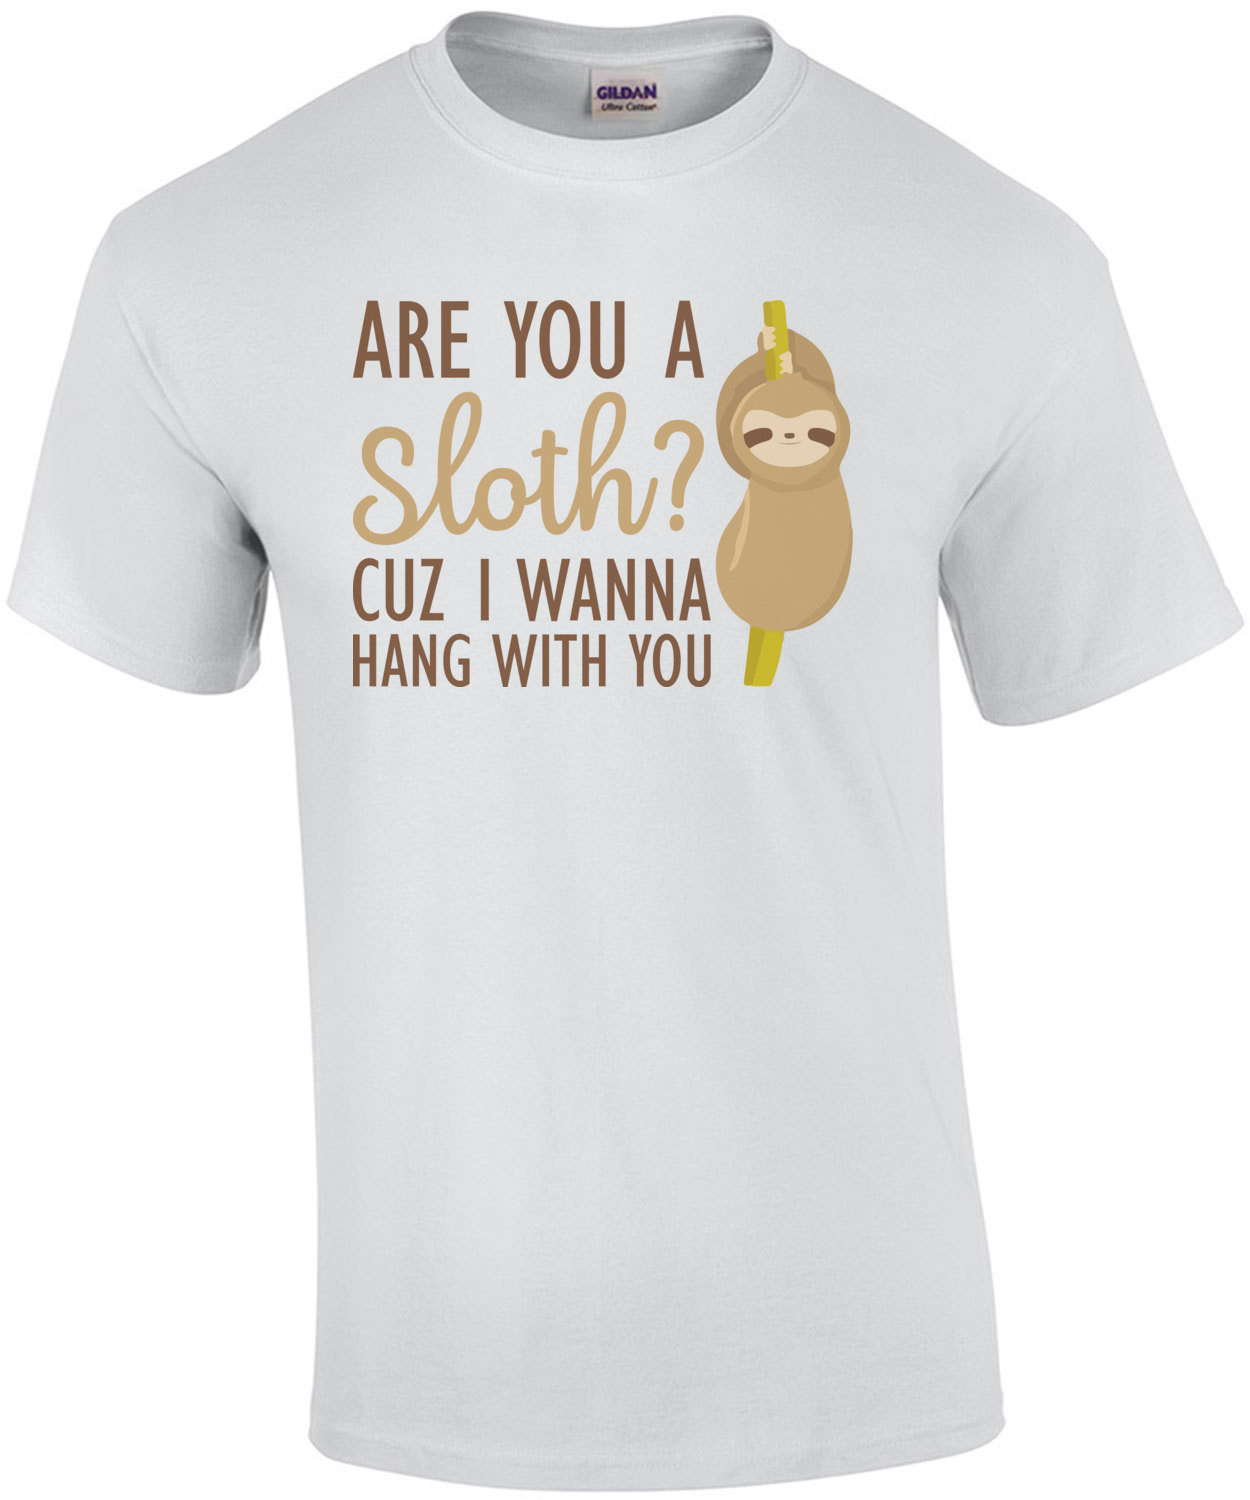 Are you a sloth? cuz I wanna hang with you - funny t-shirt